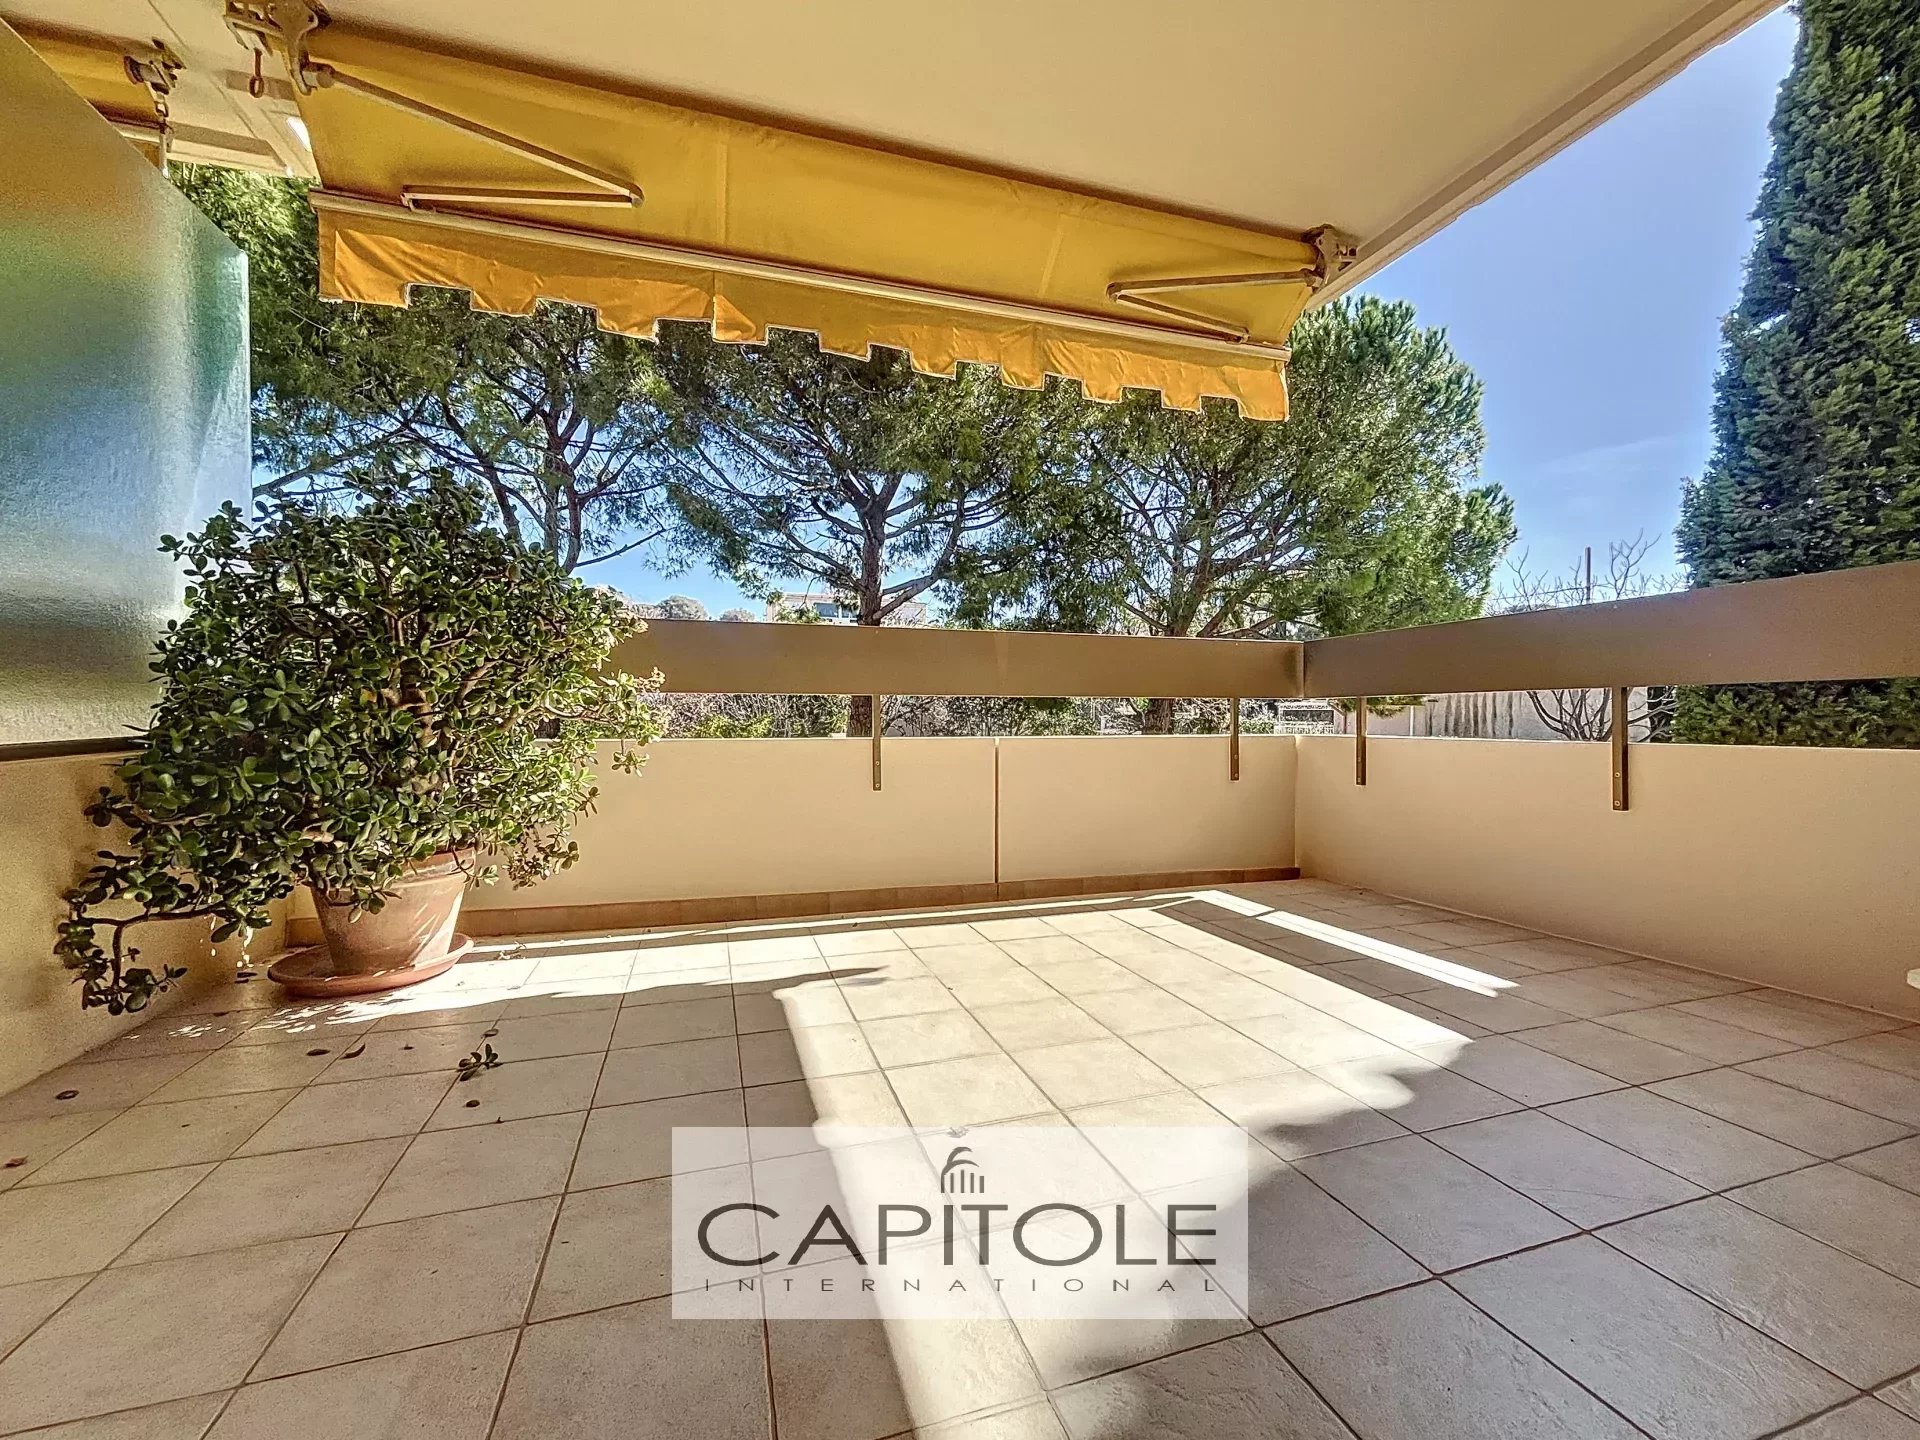 FOR SALE, near Cap d'Antibes, 2-bedroom apartment, swimming pool, spacious terraces, not overlooked, garage, cellar